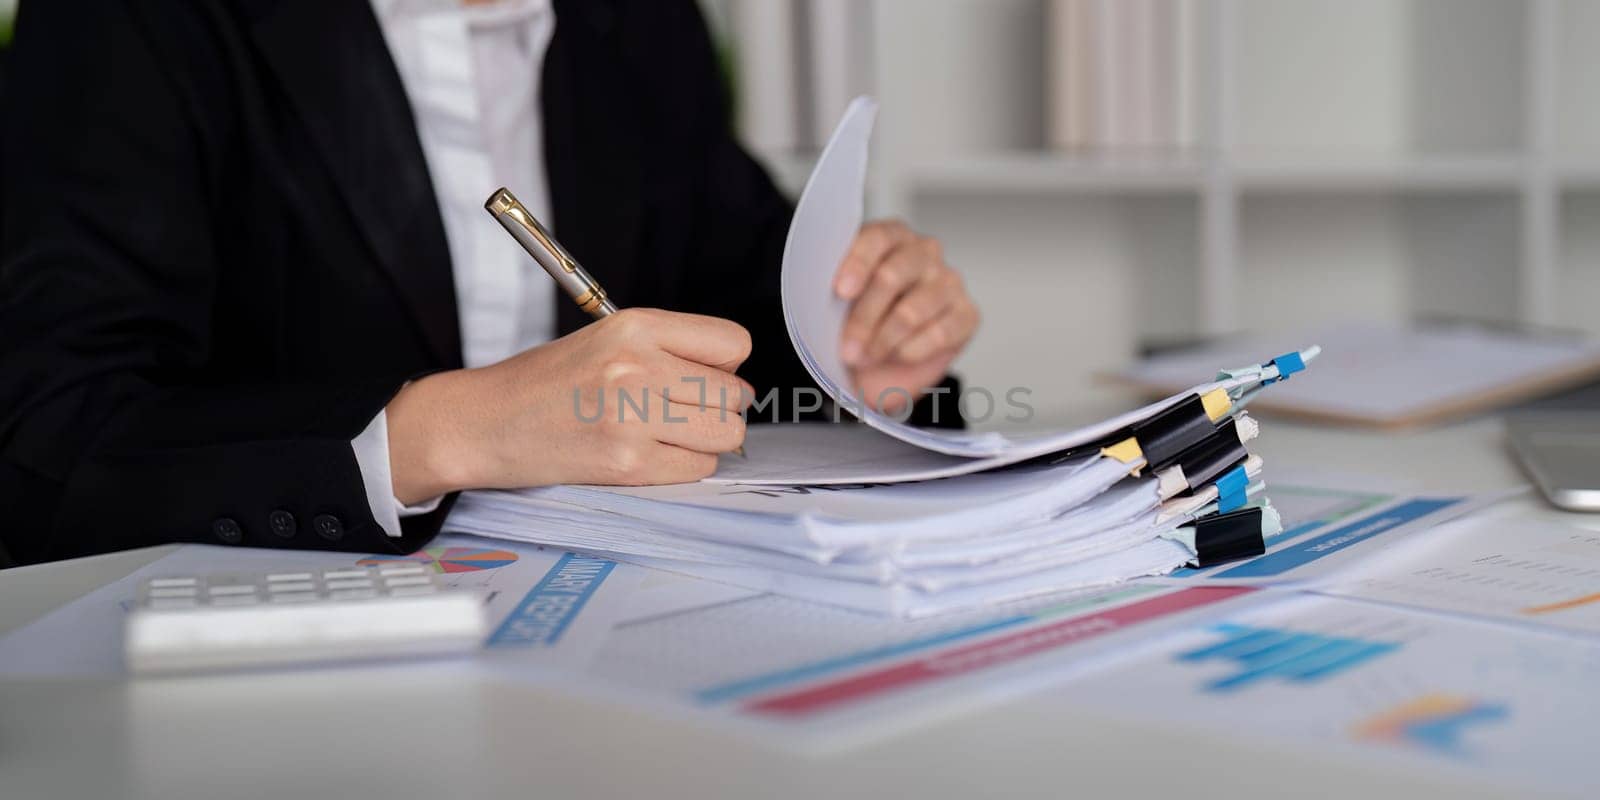 Documents, Business woman and accountant reading report for information, financial data or analysis. Paperwork, auditor check, review and bookkeeping, Calculate finance and tax in office.